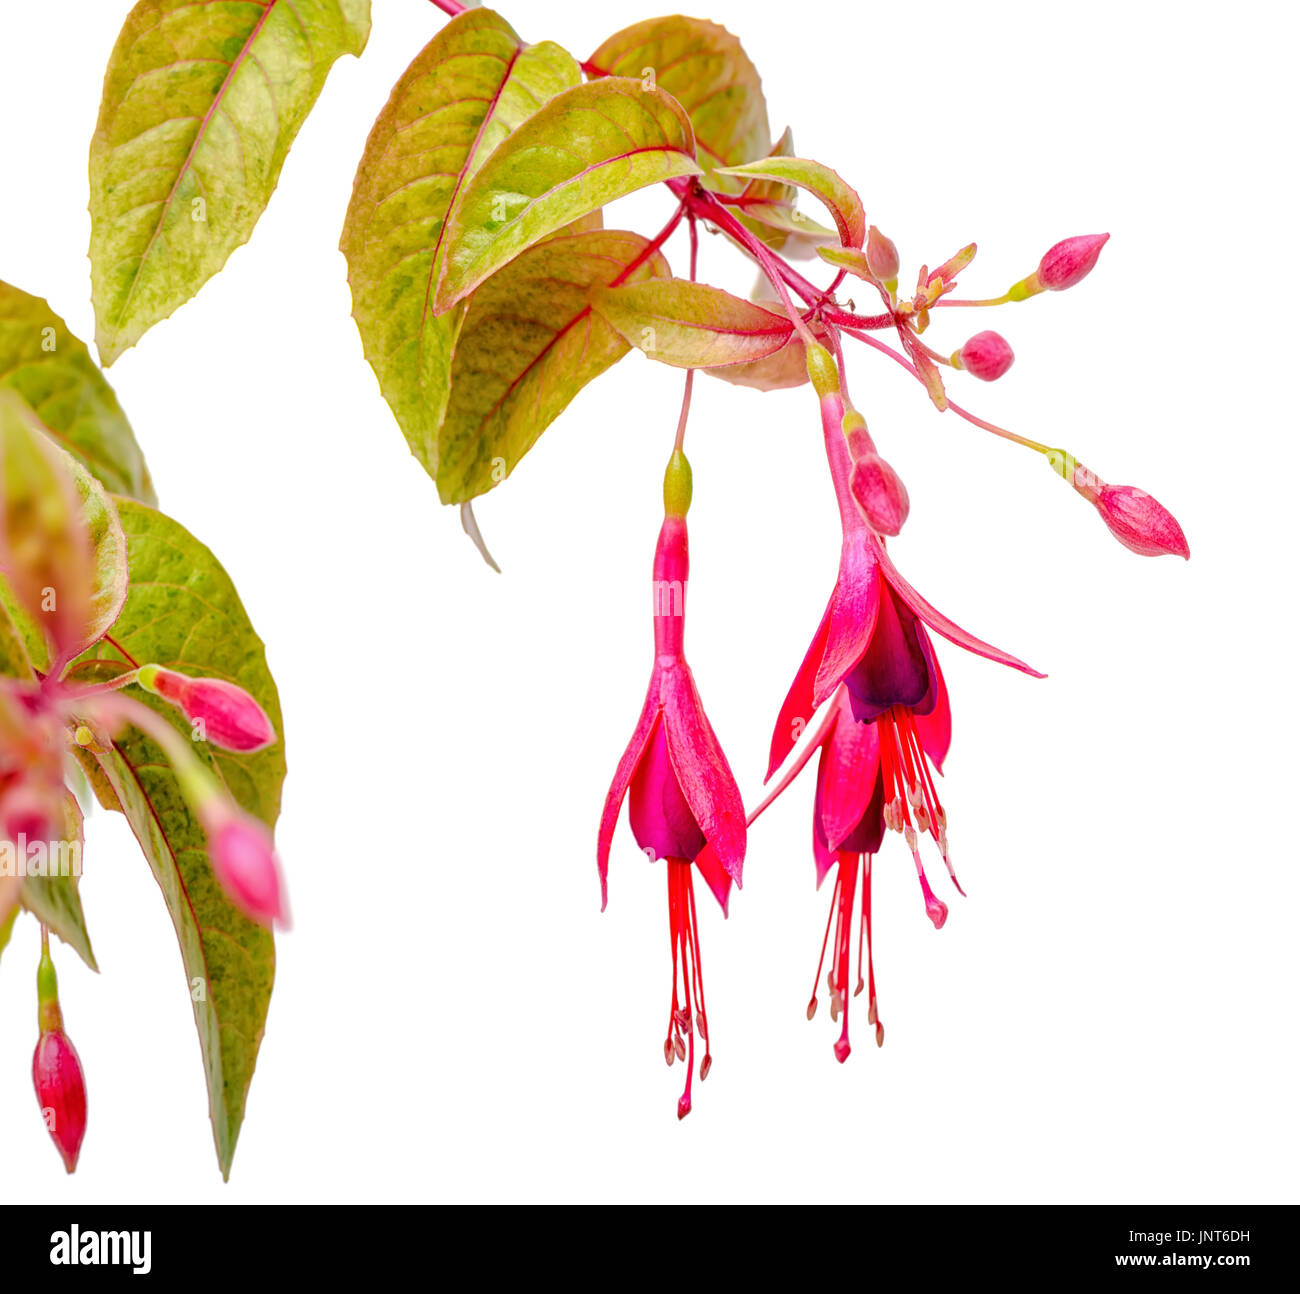 blooming hanging twig in shades of dark red fuchsia variegated is isolated on white background, Magellanica, close up Stock Photo